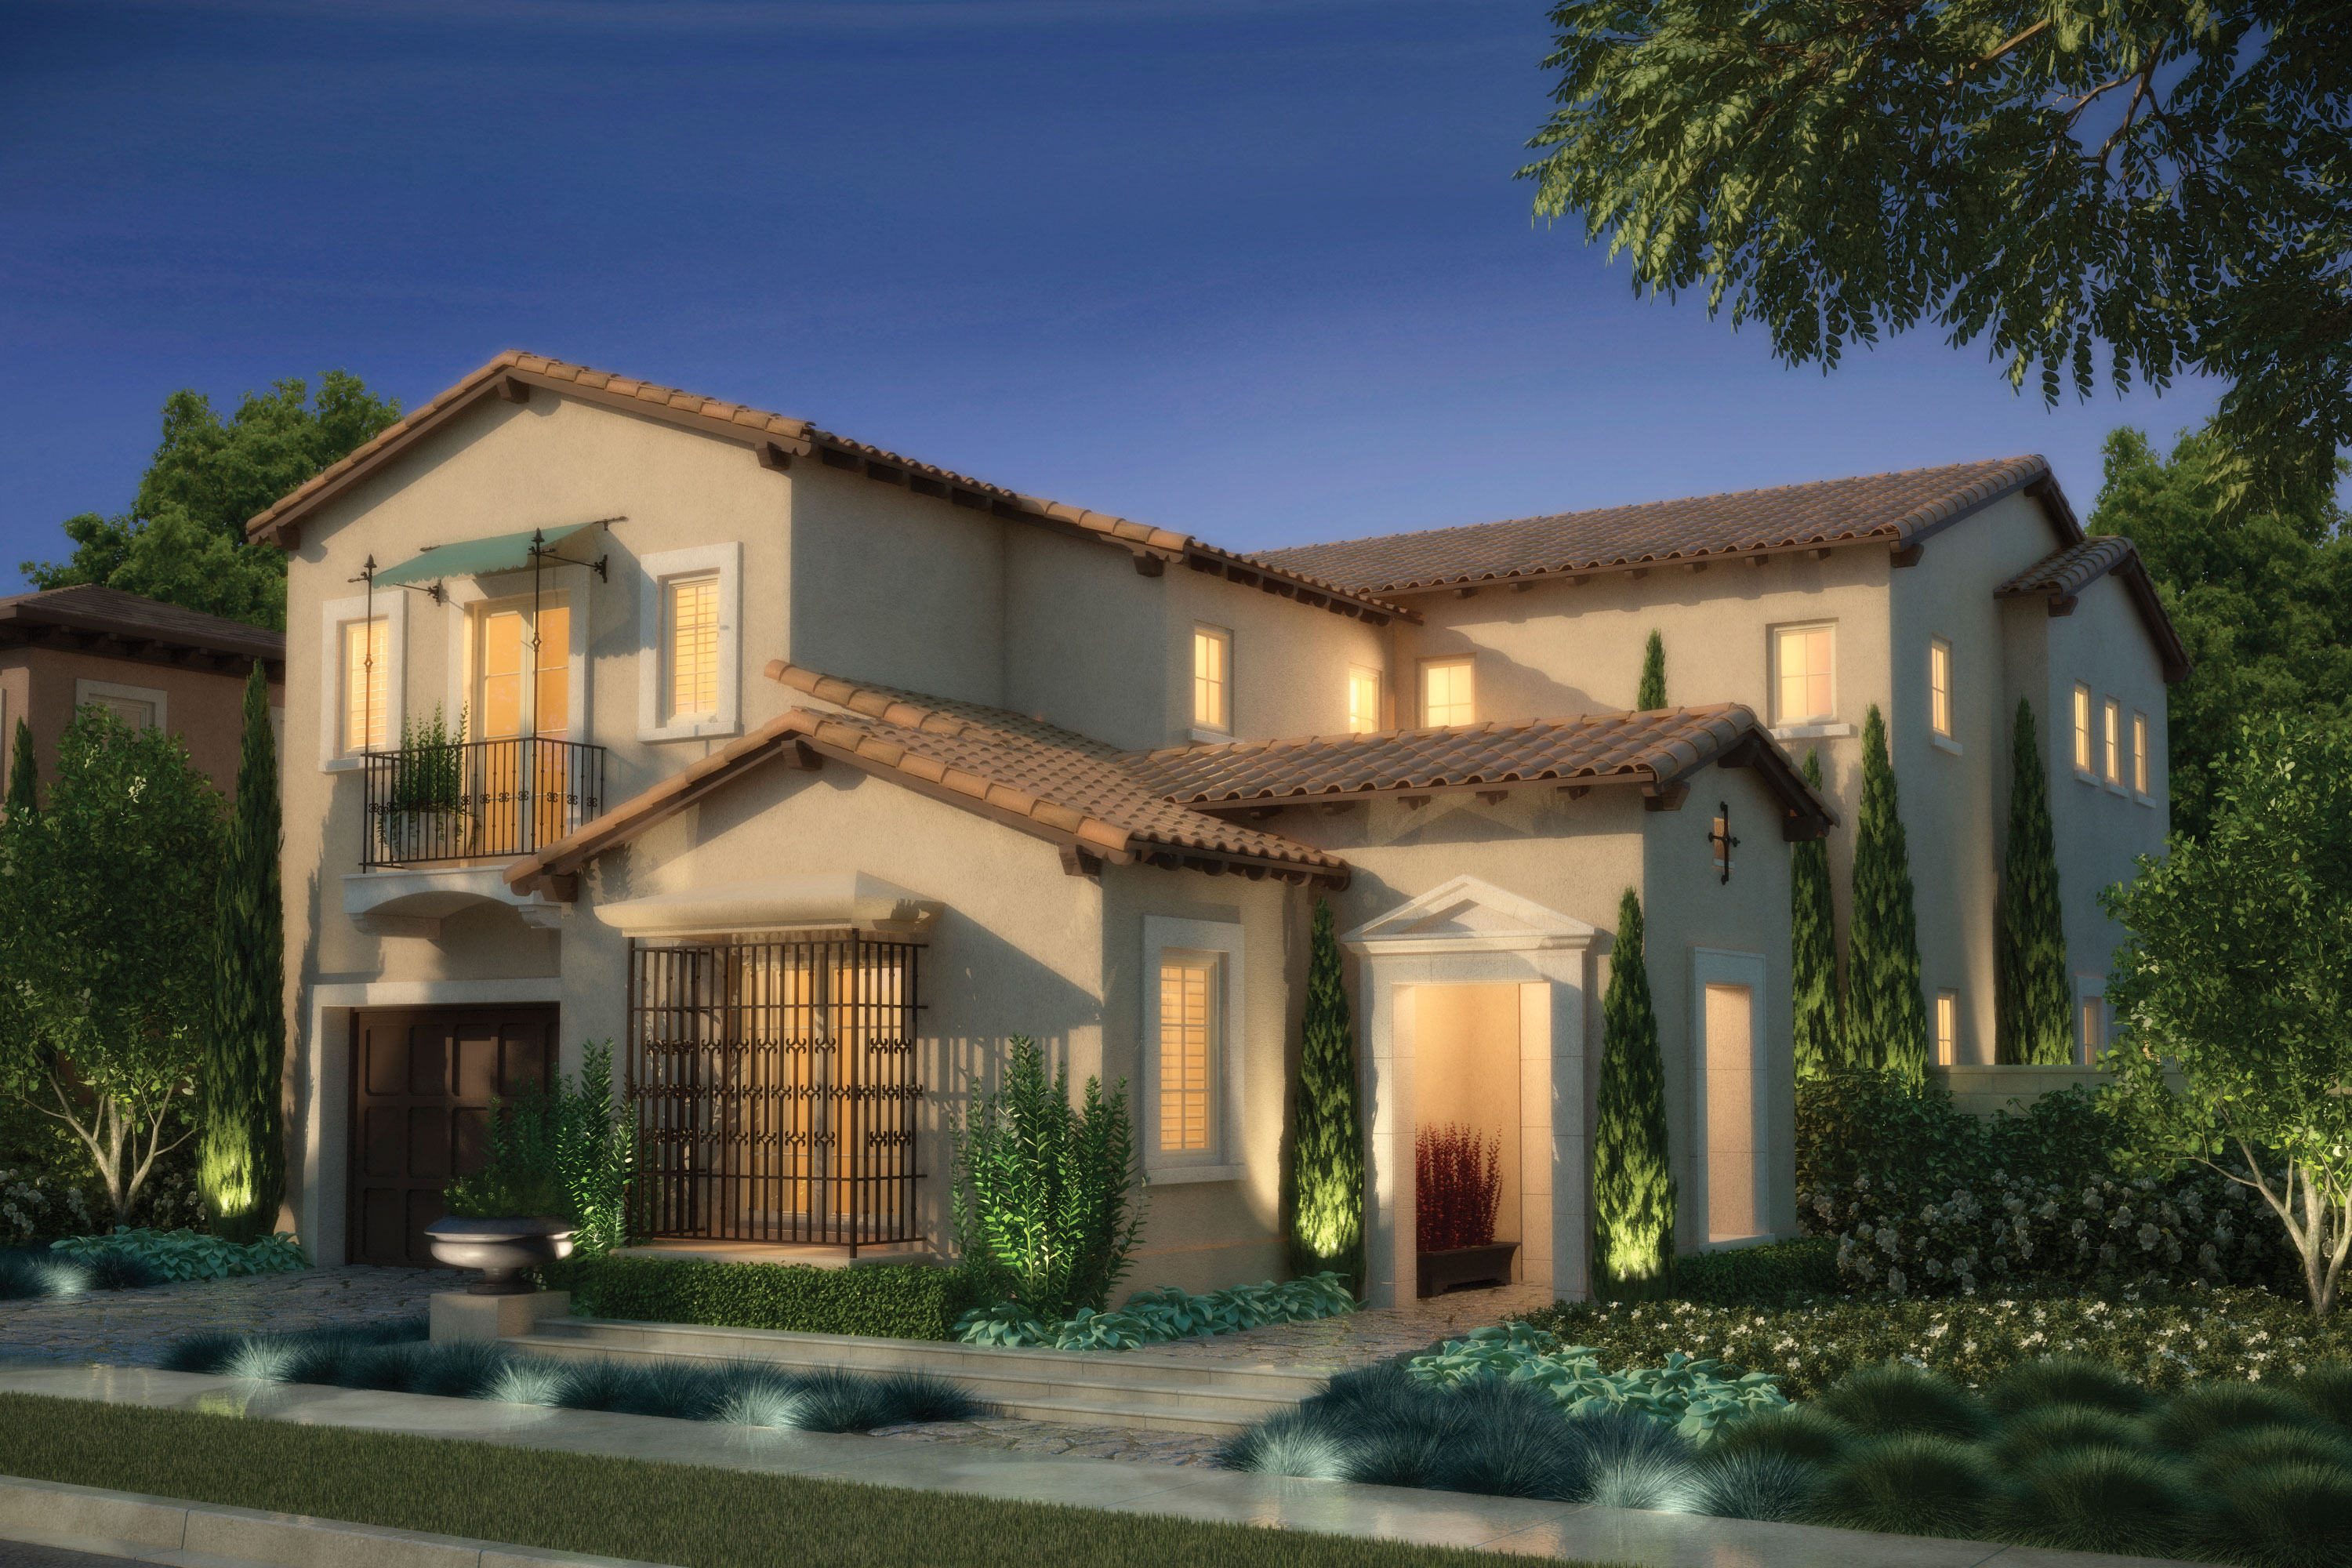 Like Capella, Saviero at Orchard Hills puts a premium on living well, with expansive master suites, open concept kitchens and great rooms.